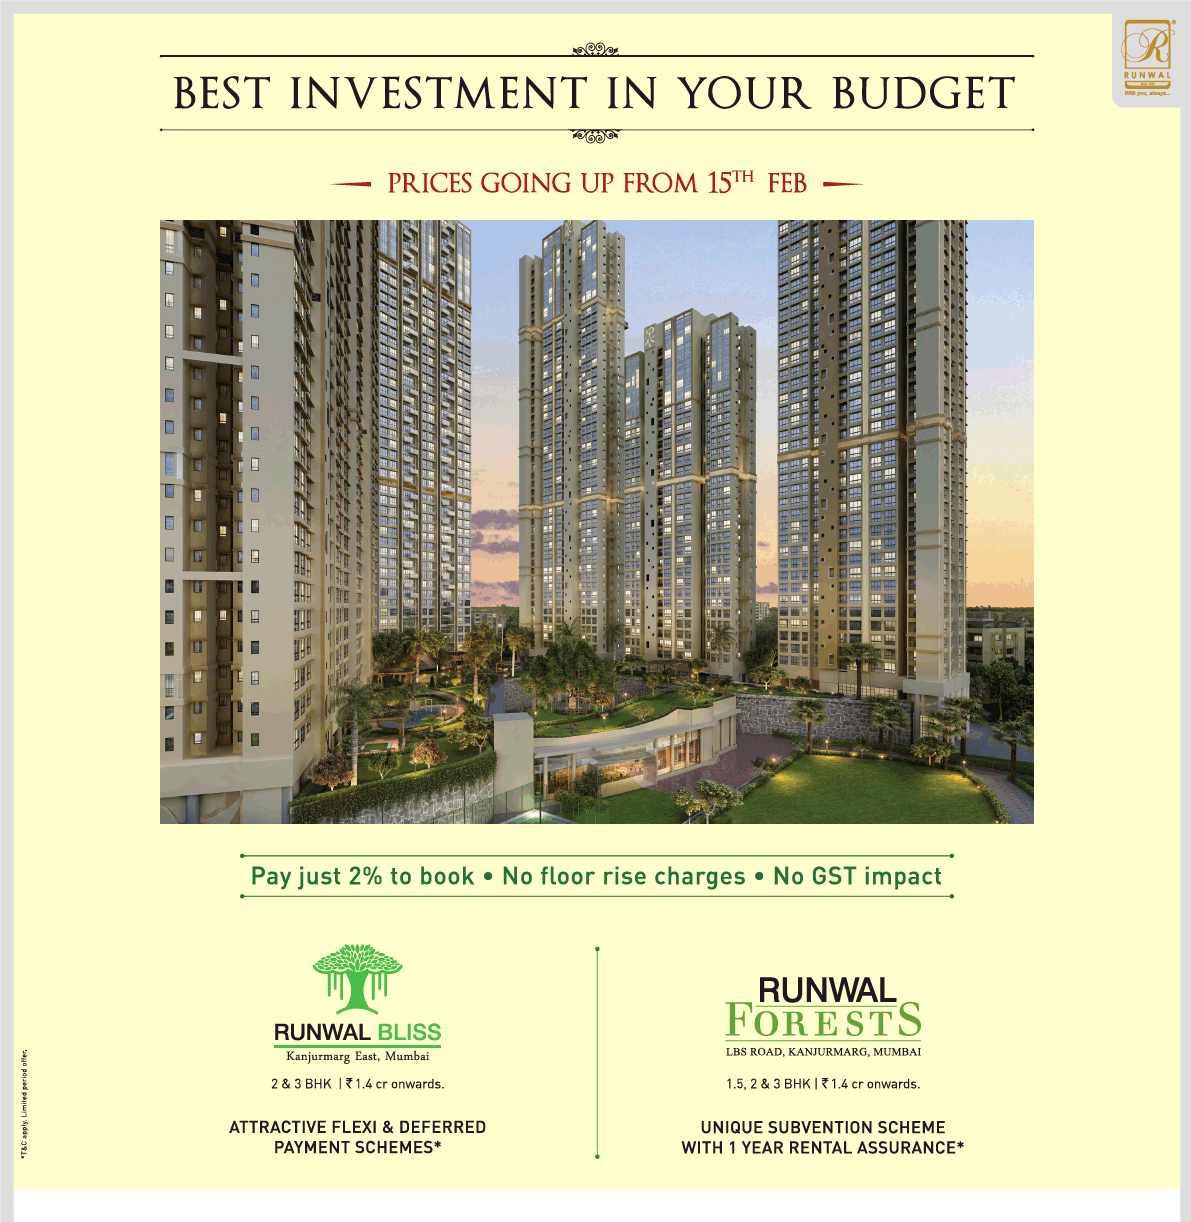 Best investment in your budget at Runwal Properties in Mumbai